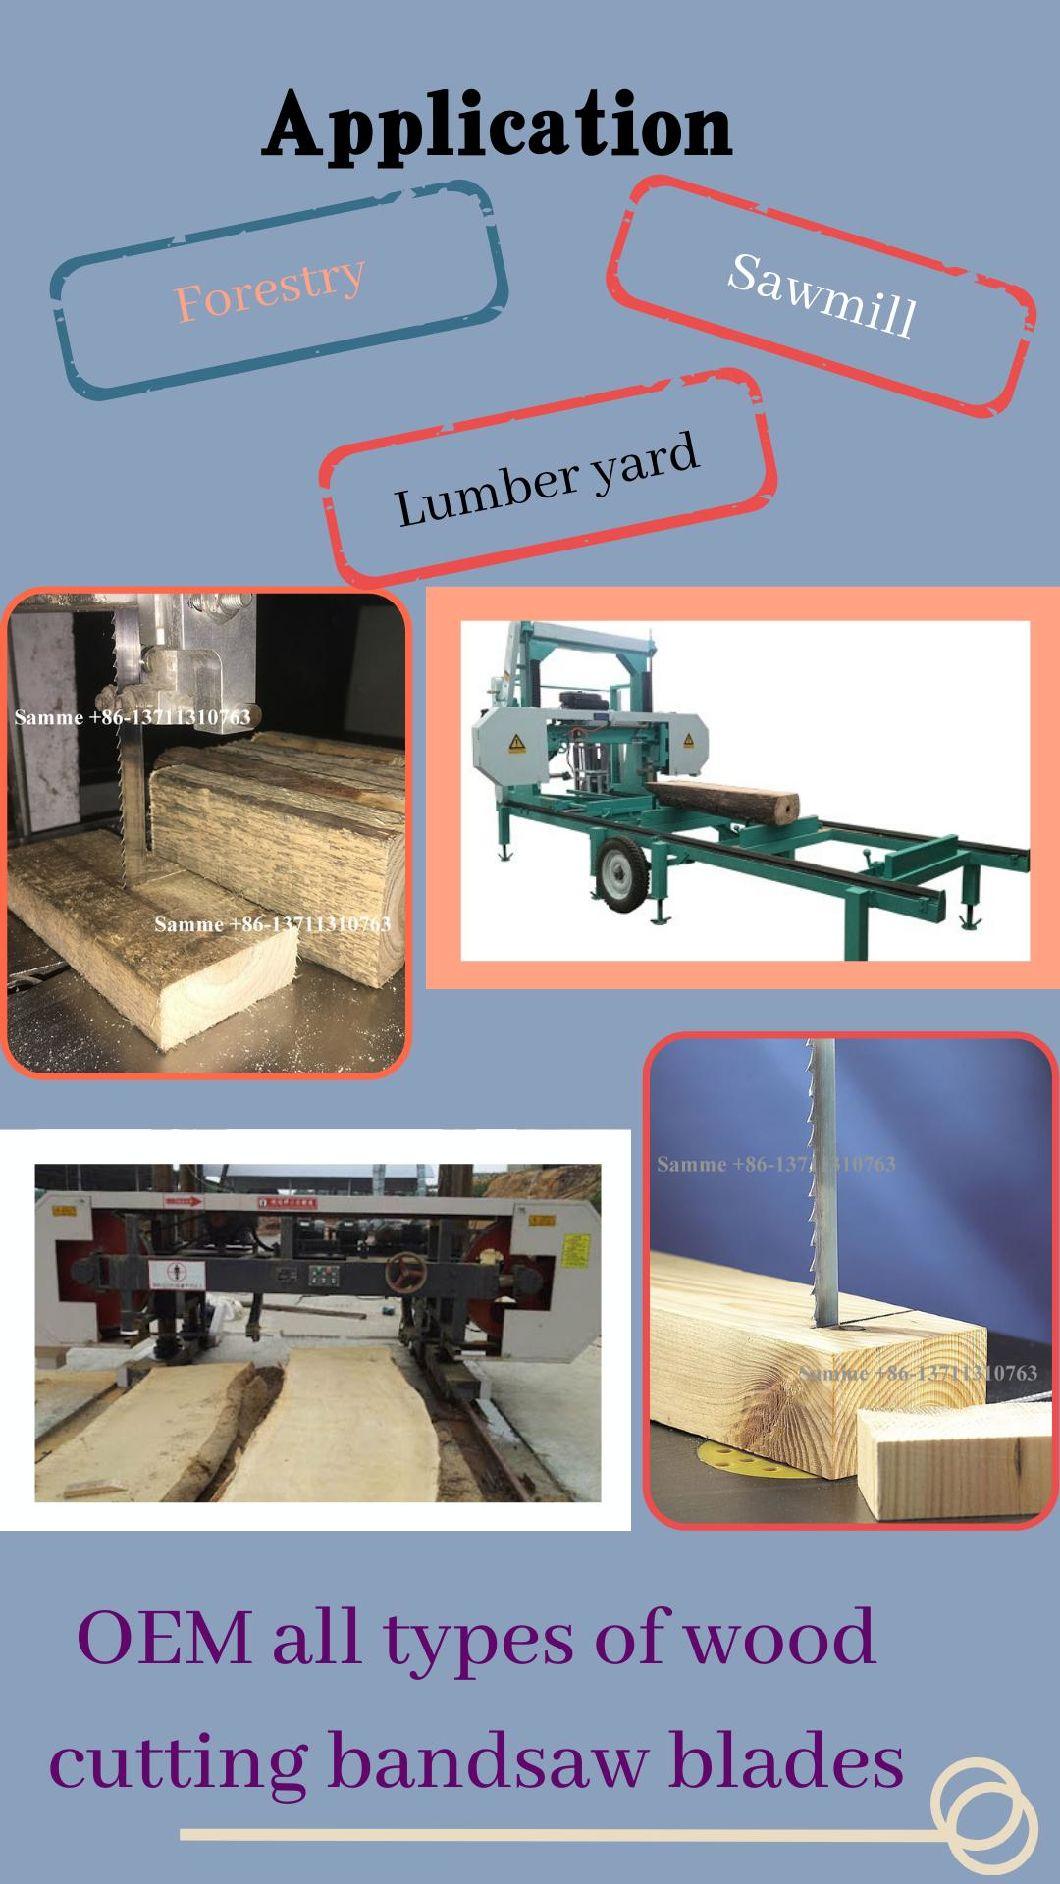 Woodlands Saw Mills Woodworking Tools Manufacturers Bandsaws for Wood